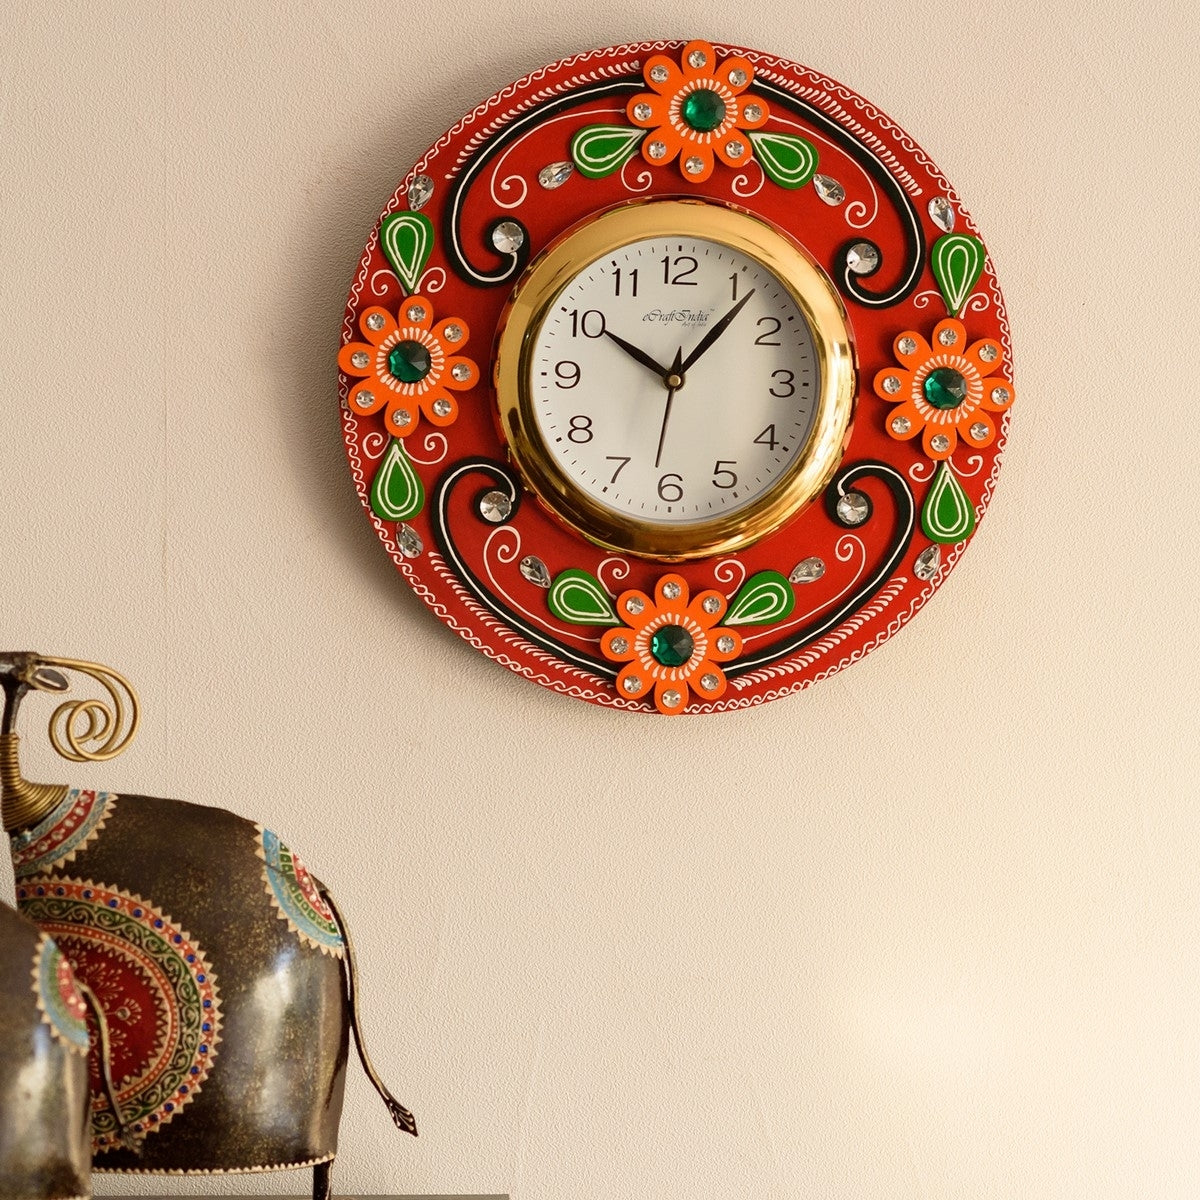 Crystal Studded Floral Papier-Mache Wooden Handcrafted Wall Clock 1